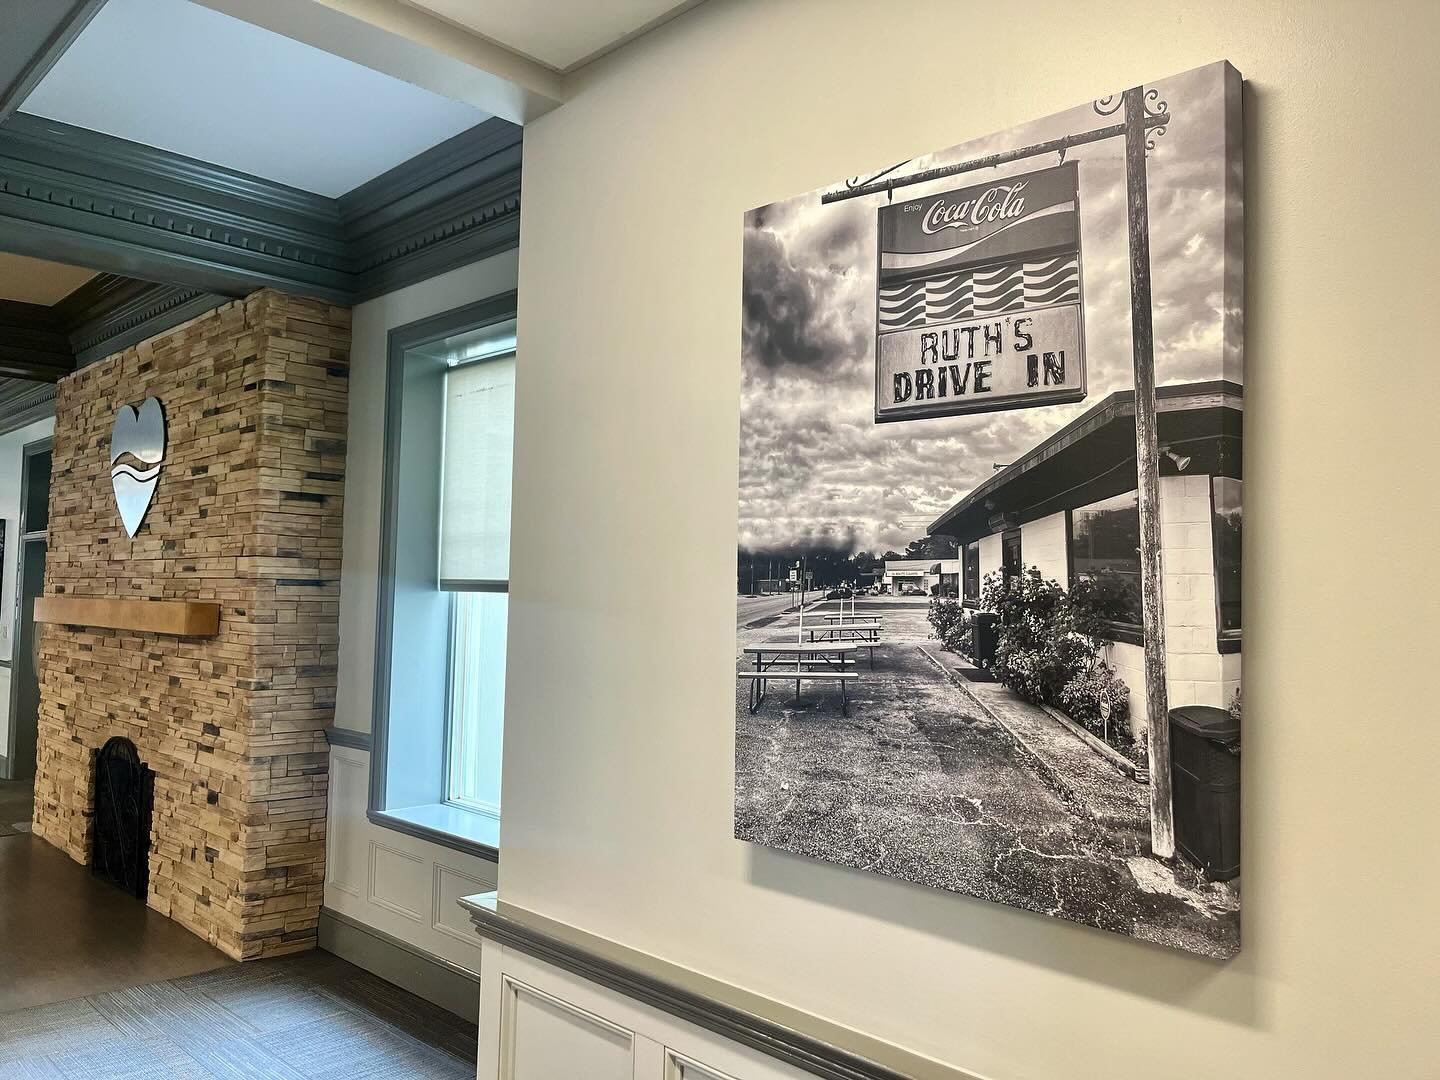 ❓Have you noticed the local landmark art at our branches??

This one hits home today as we celebrate the last day of business for a local legend. 

🍔 Here's to a happy retirement for the Ruth's Drive In team! Thank you for 79 years of serving up the